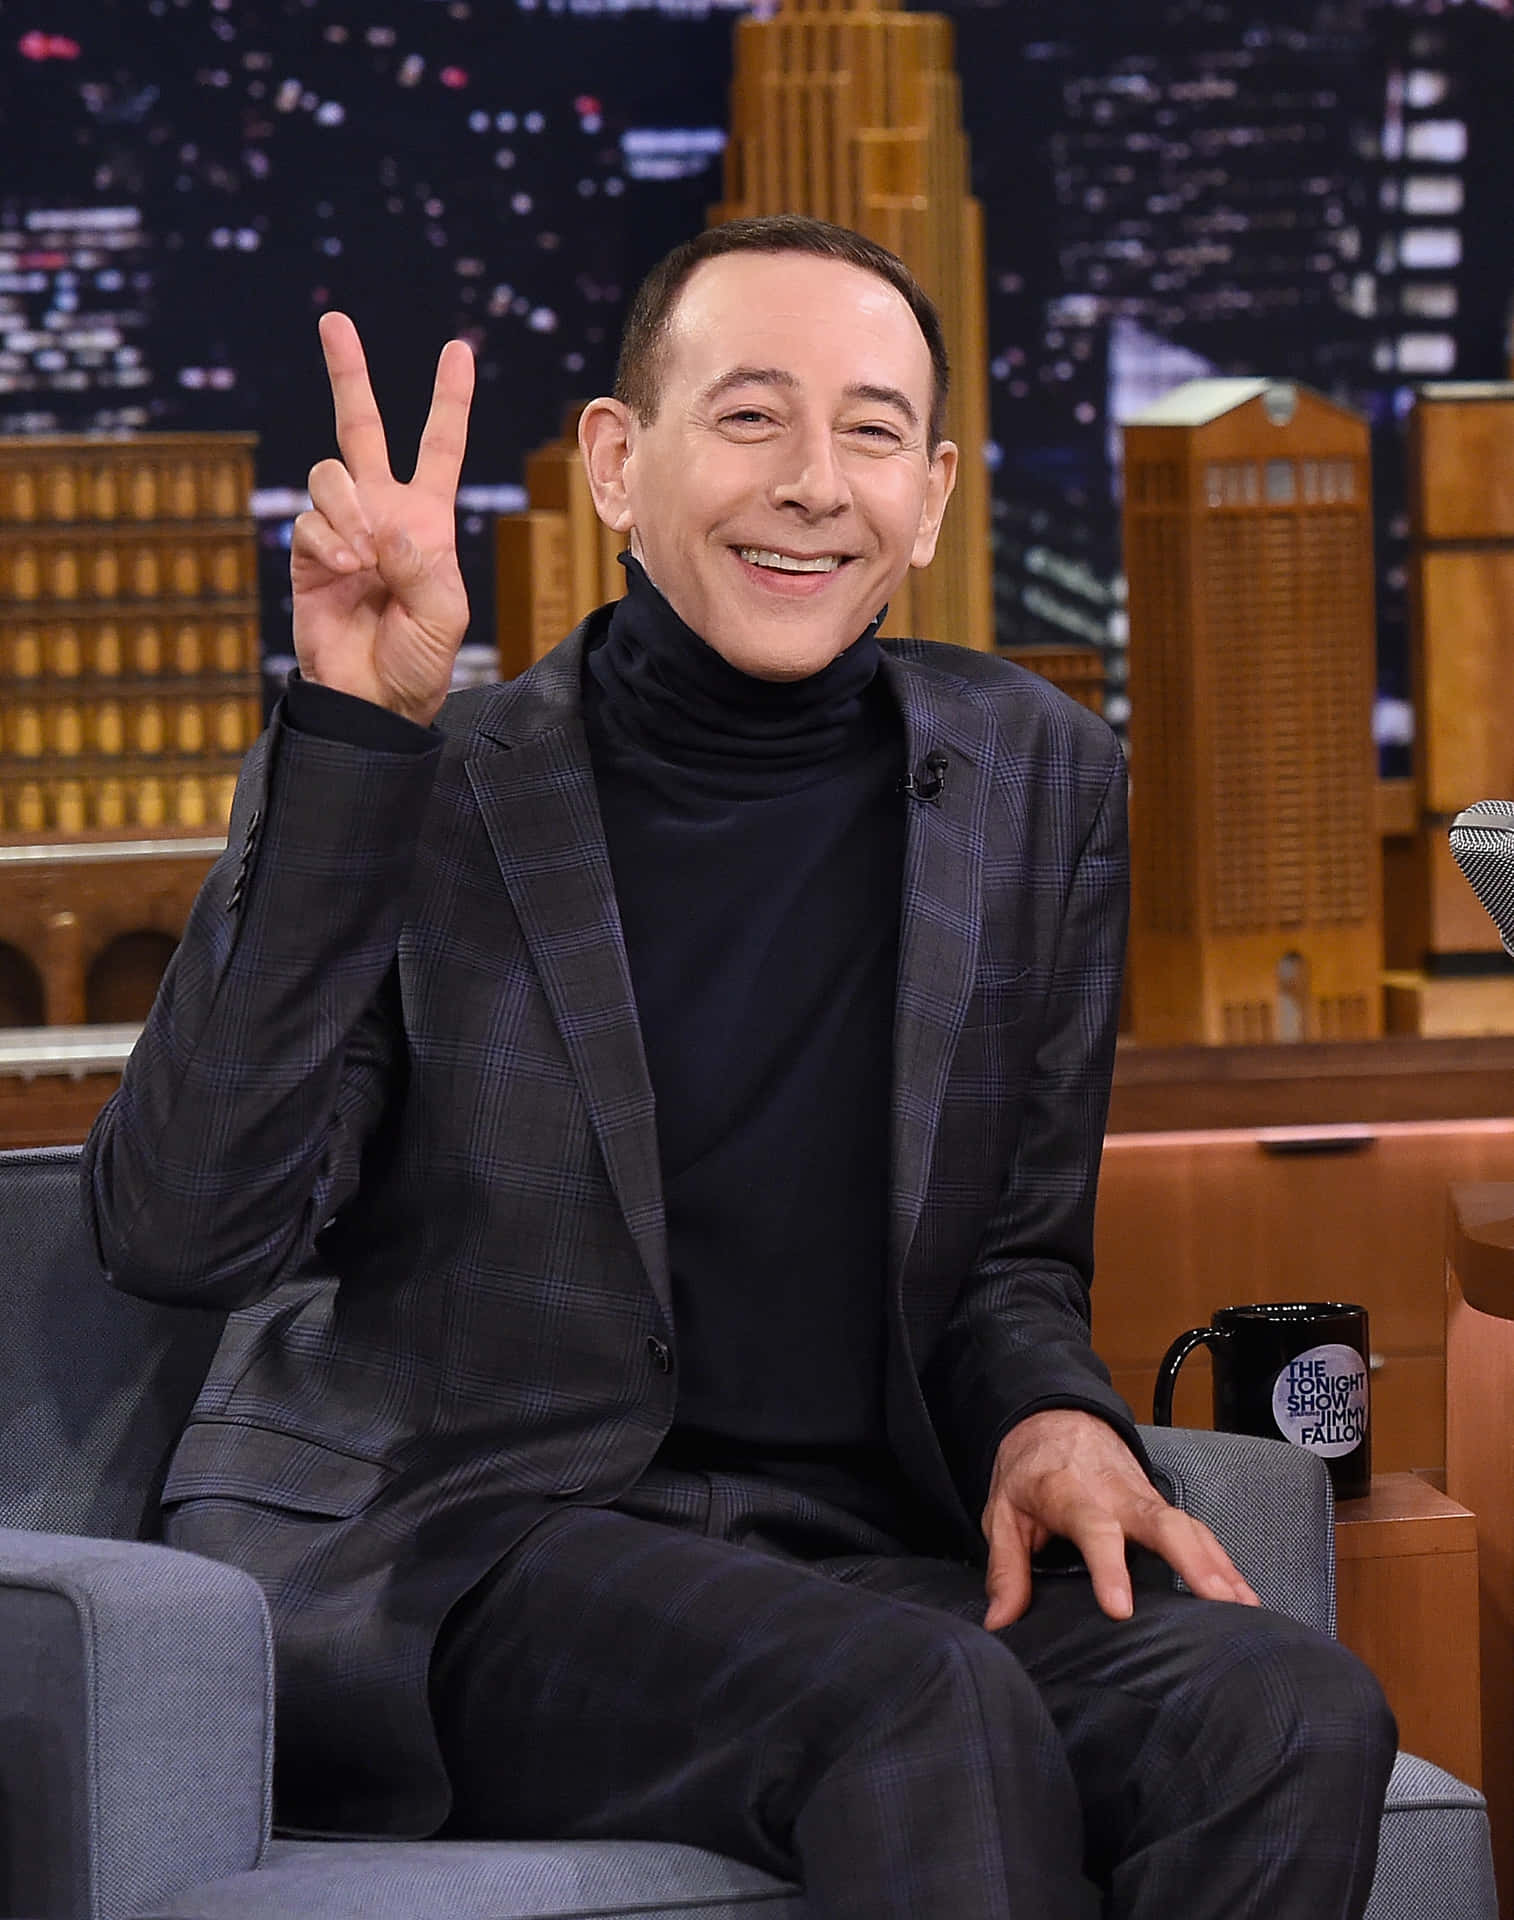 Paul Reubens the well-known actor, writer and comedian Wallpaper